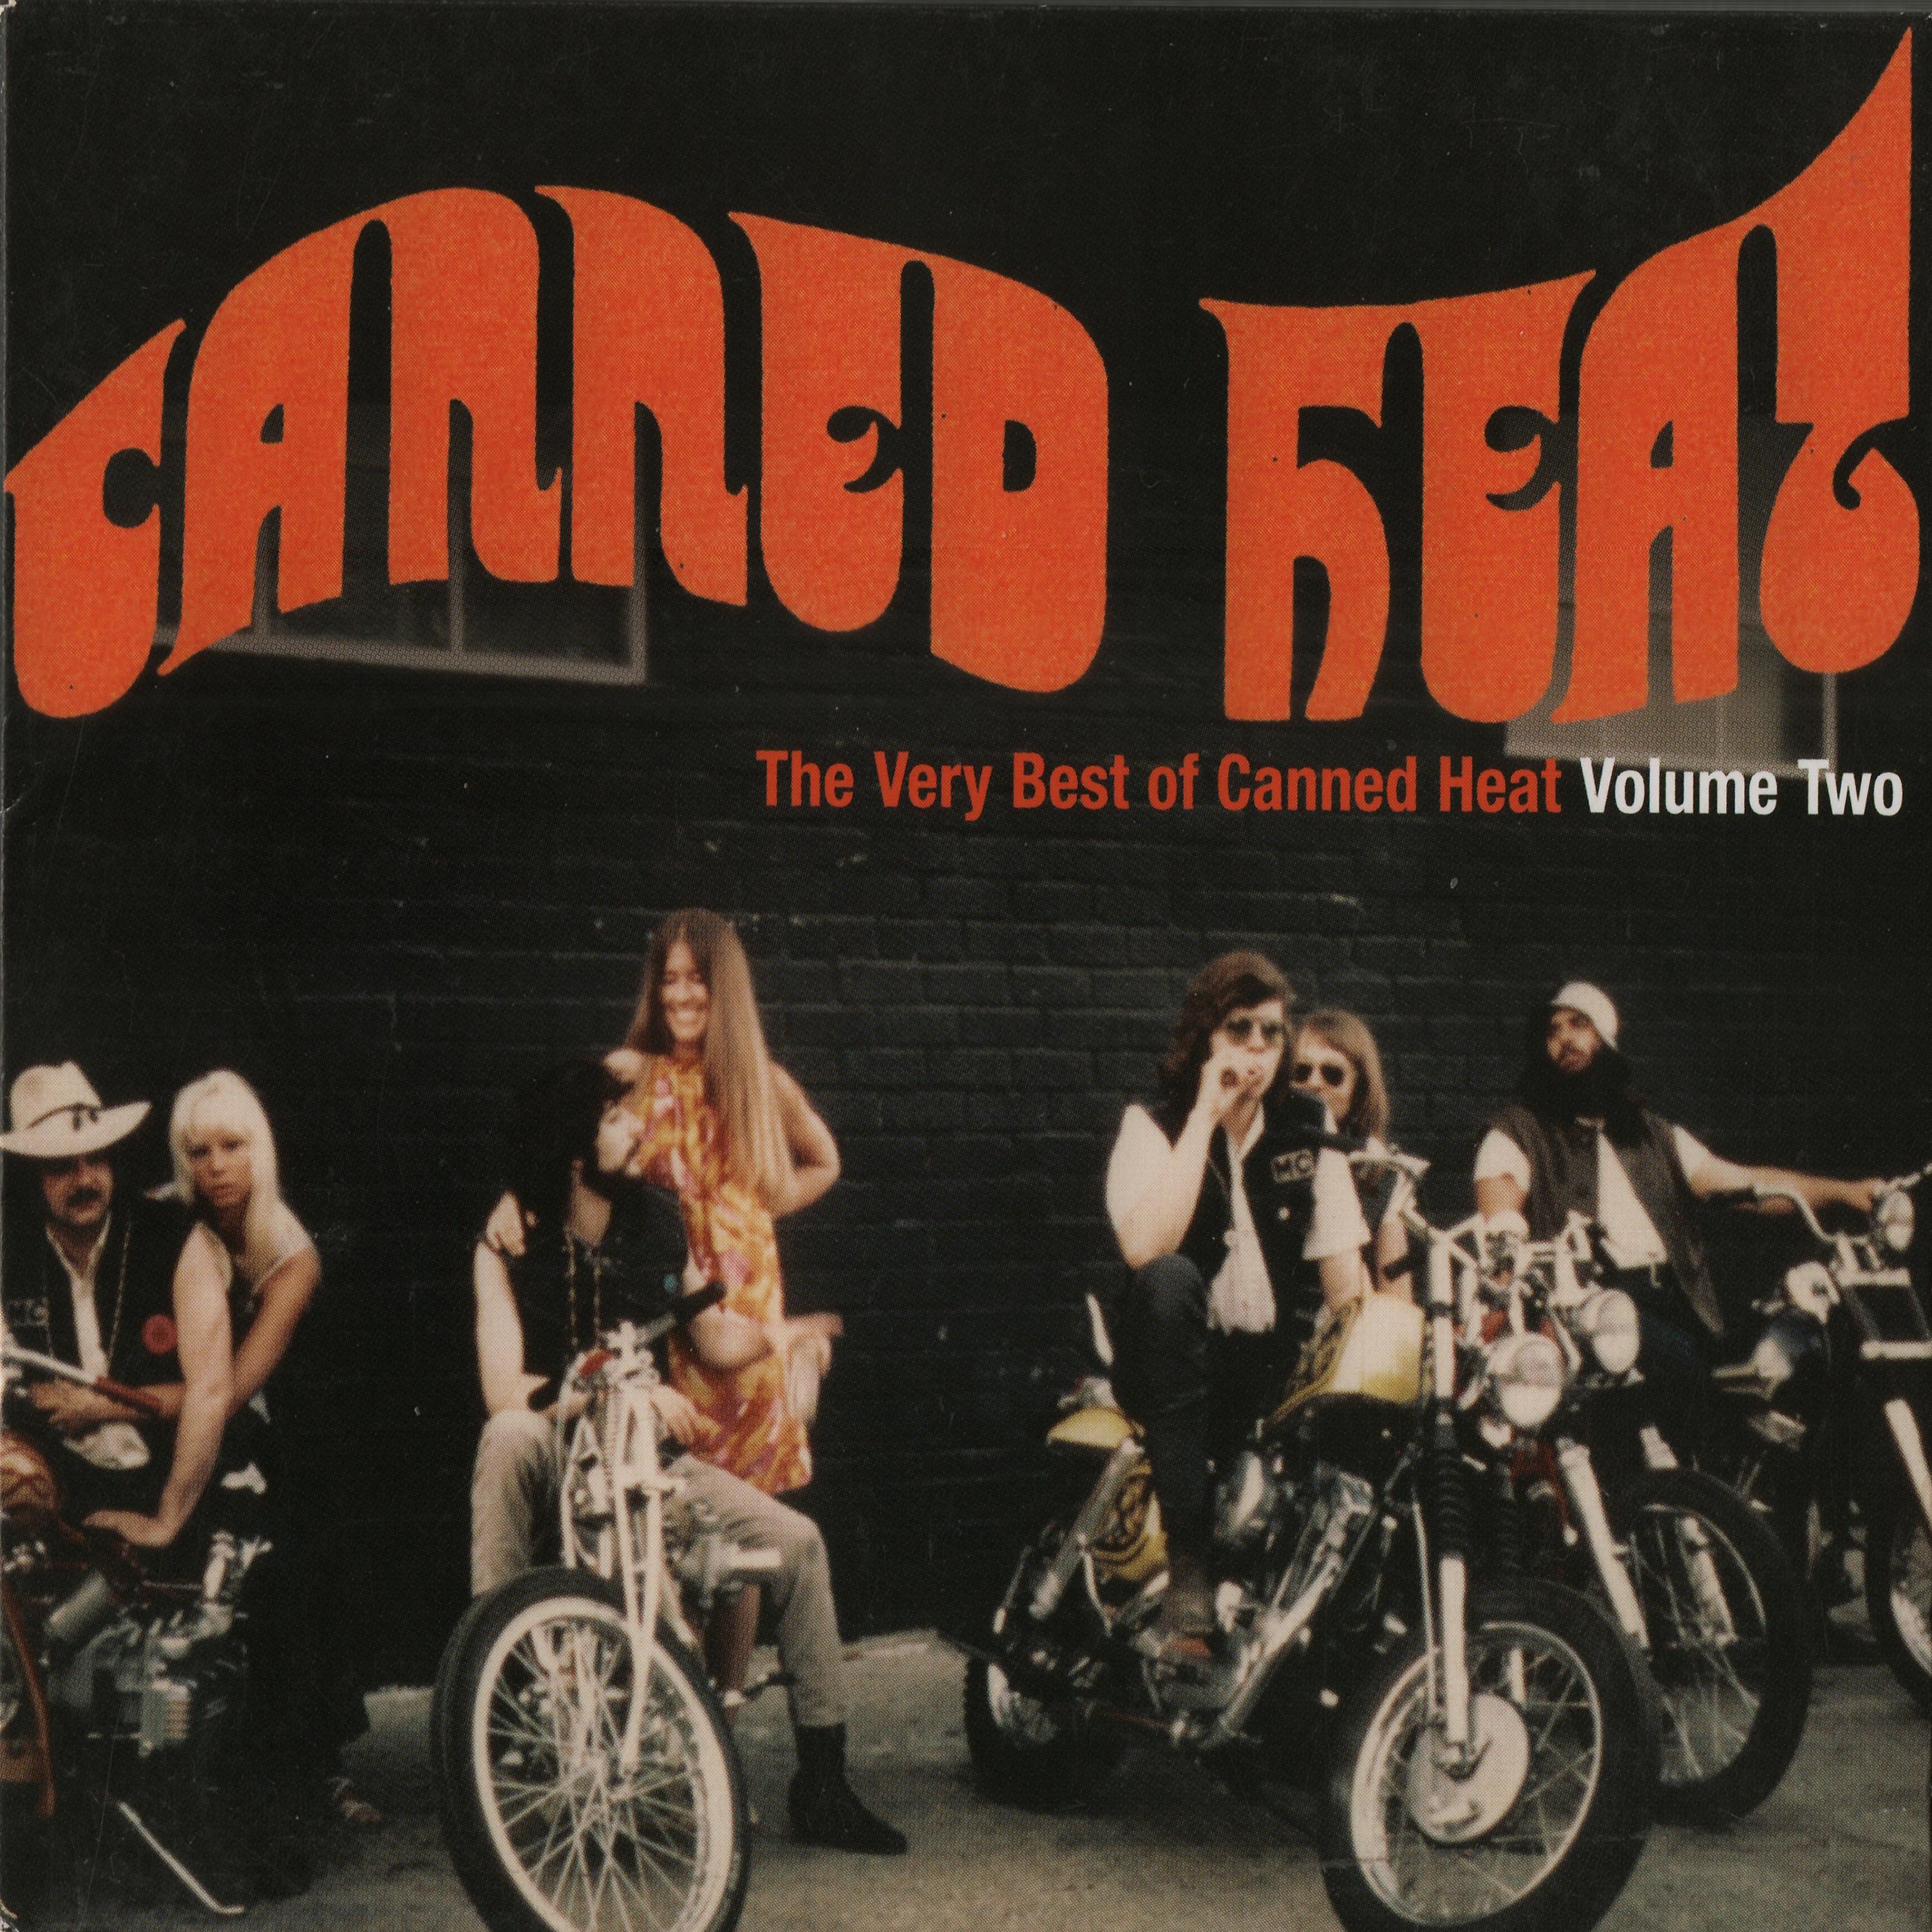 Canned heat steam фото 48